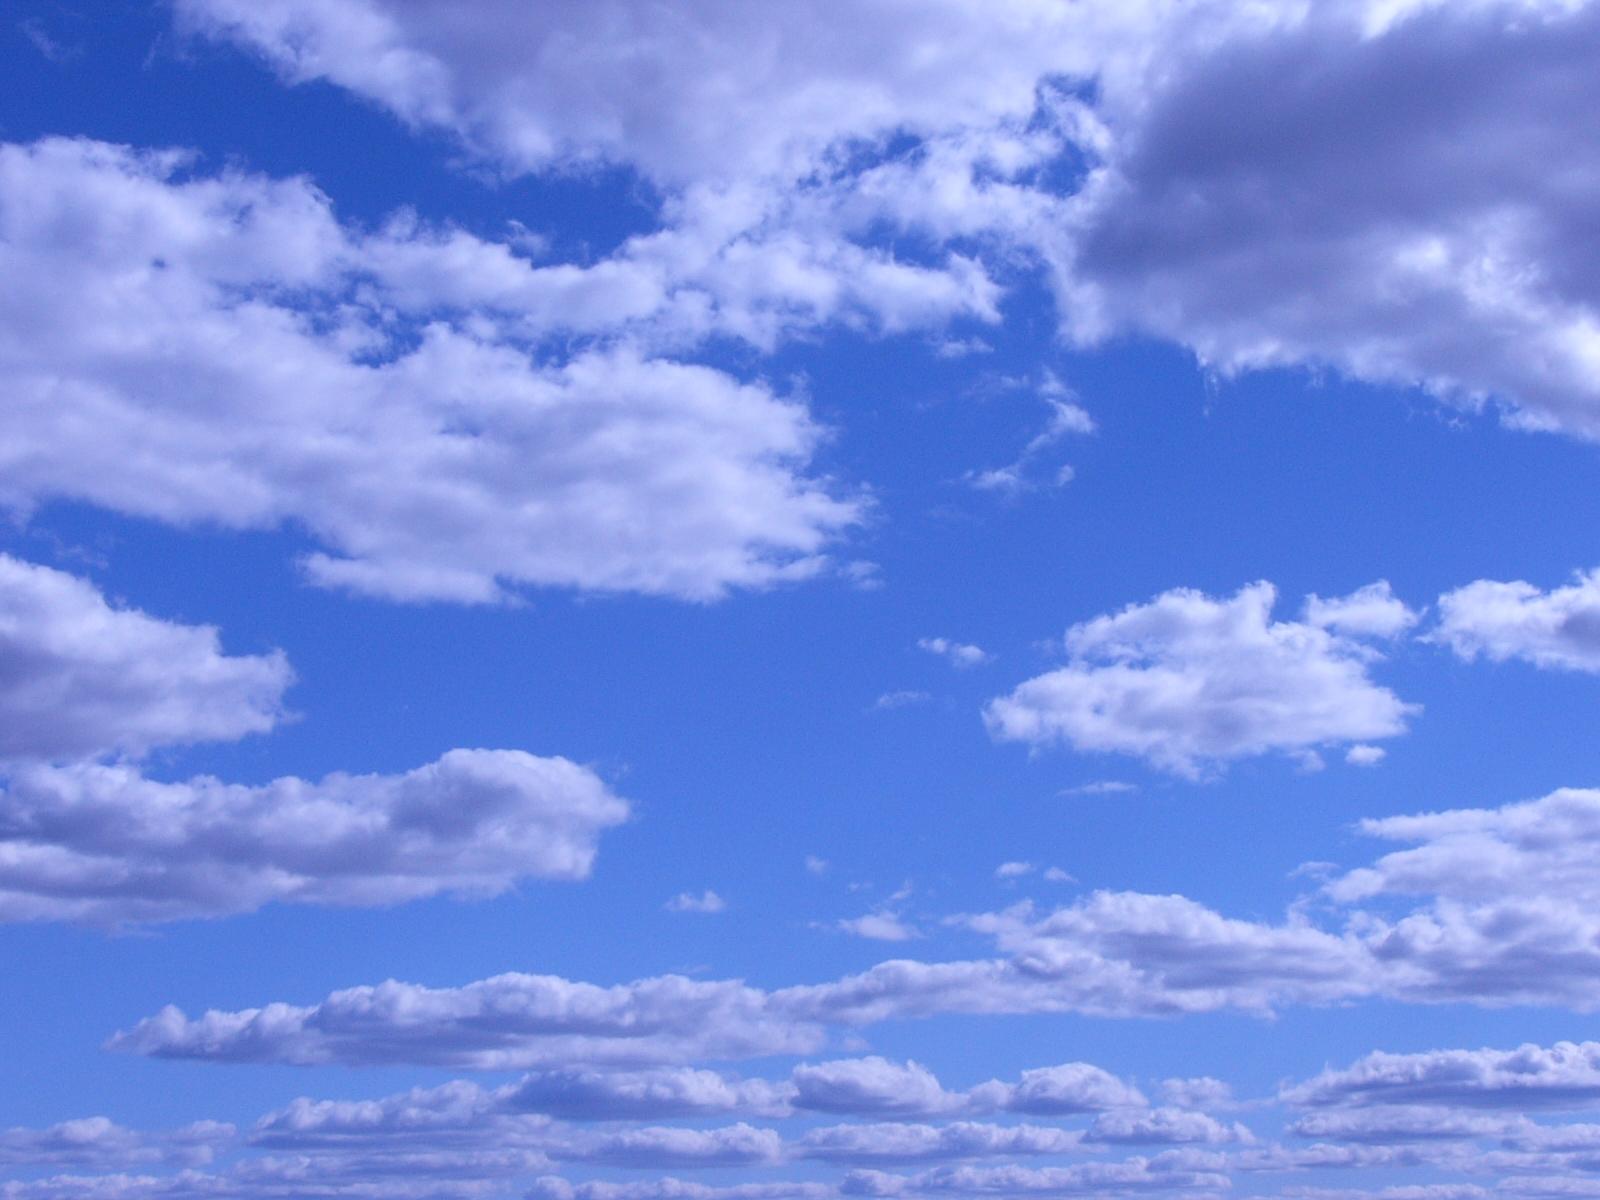 Clouds Wallpapers. Images and nature wallpaper Clouds pictures (5628)